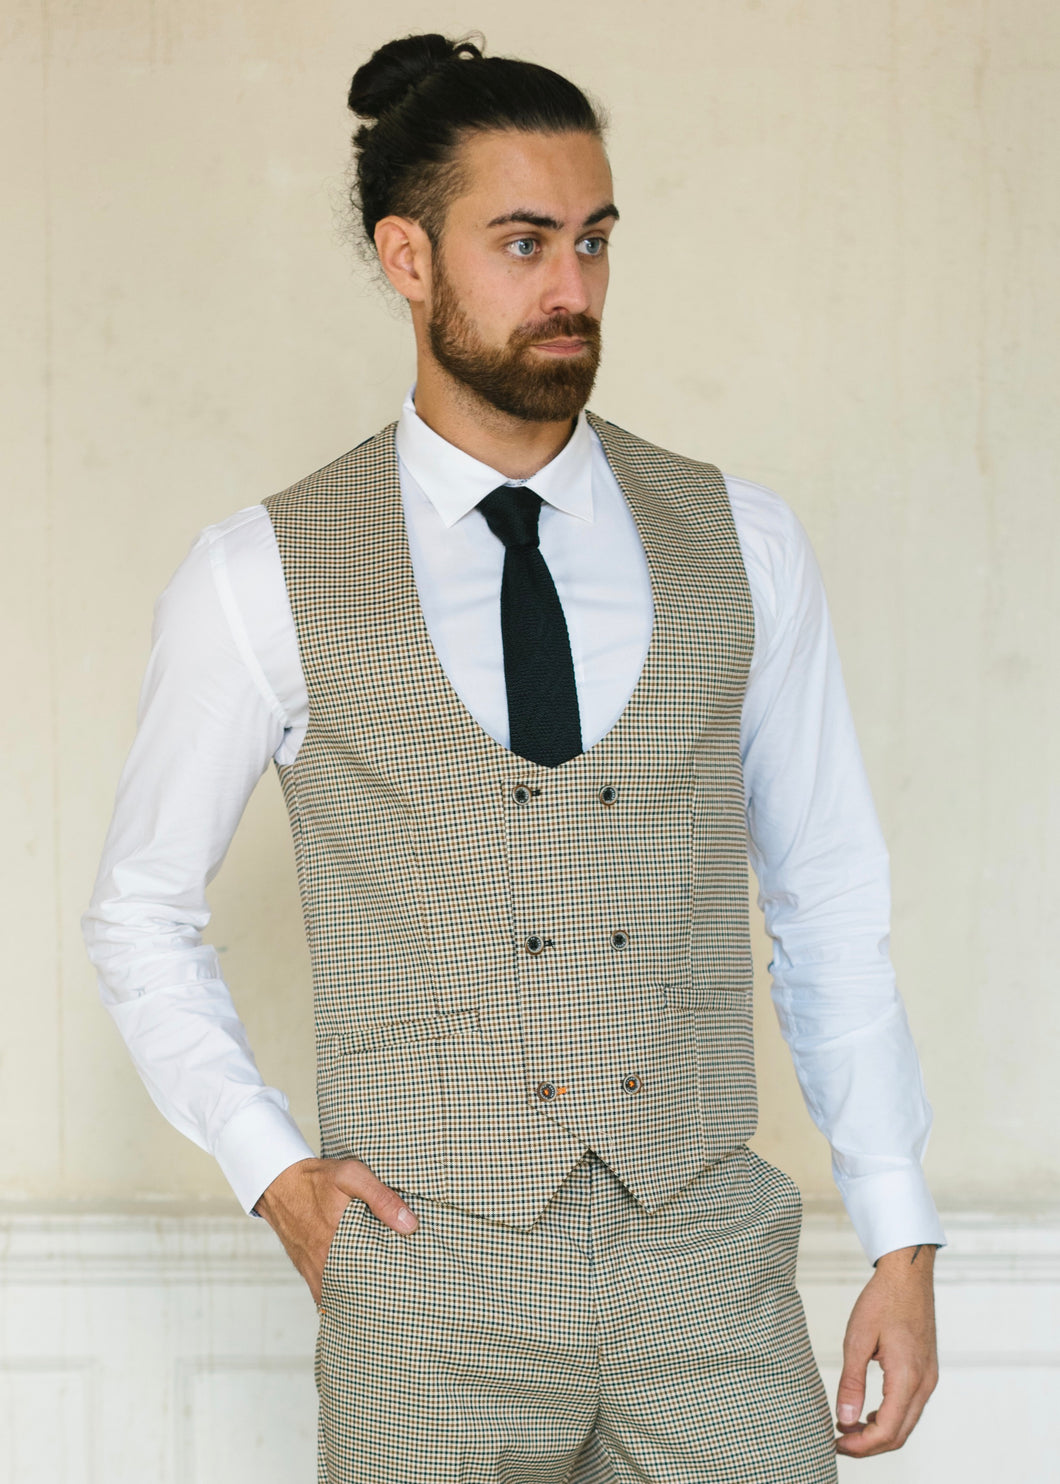 Cavani Elwood Houndstooth Checked Waistcoat worn with matching trousers, knit tie and white shirt